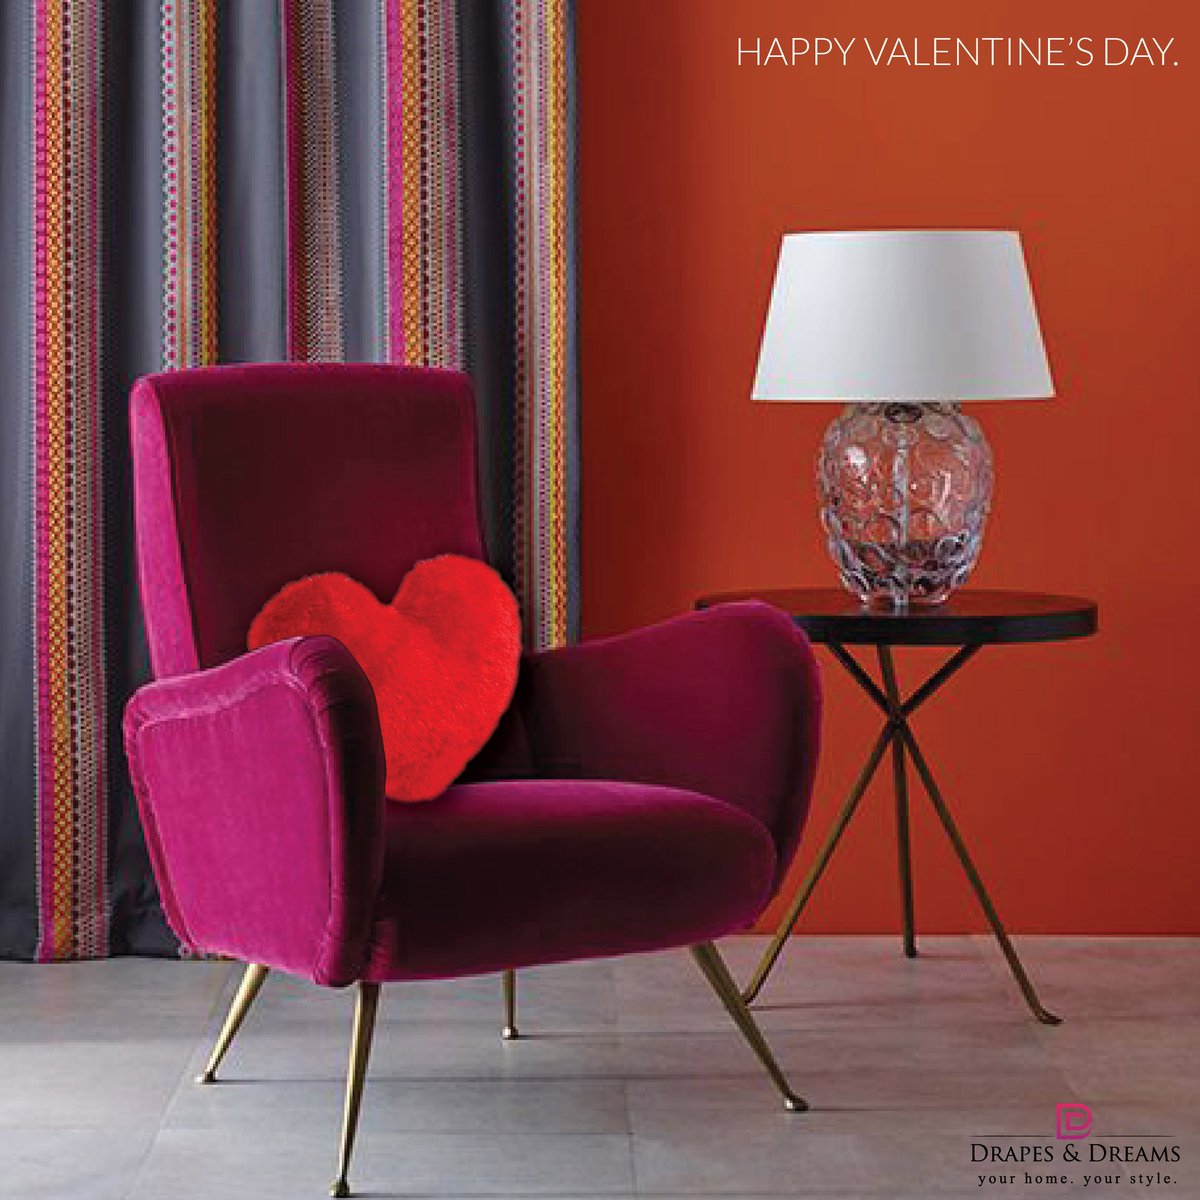 The Drapes and Dreams team would like to wish you all a Happy Valentine's Day! #ValentinesDay2018 #ValentinesDaySpecial #DrapesandDreams #InteriorDesign #Furniture #SoftFurnishing #Cushions #Sofas #Curtains #Carpet #Dinningtables #Homedecor #HomeSpace #luxurylife